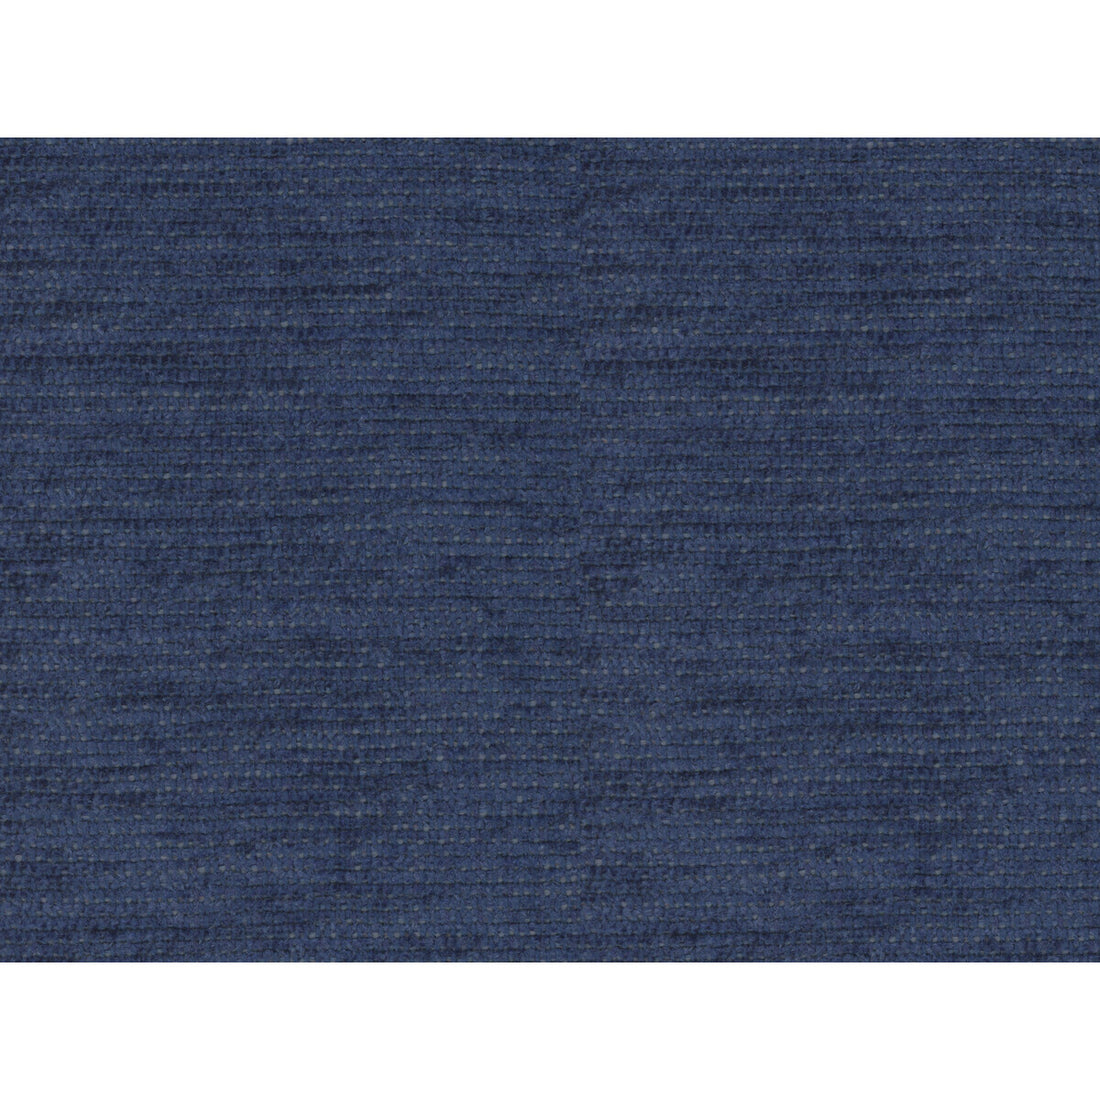 Revard Chenille fabric in navy color - pattern 8016107.50.0 - by Brunschwig &amp; Fils in the Chambery Textures collection